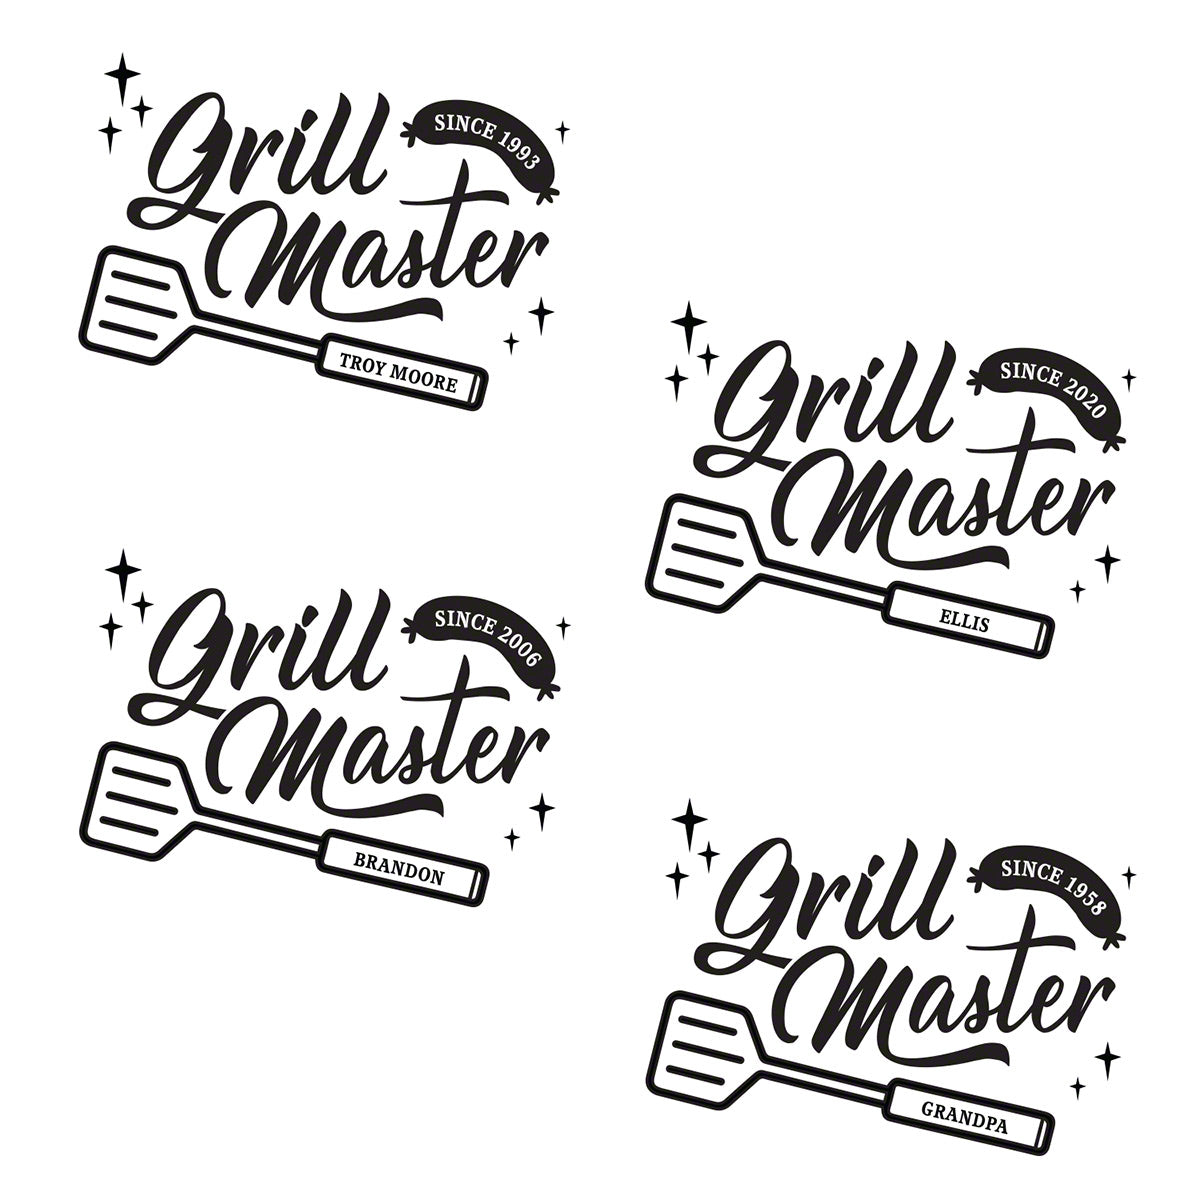 Personalized Grilling Tools Grill Master